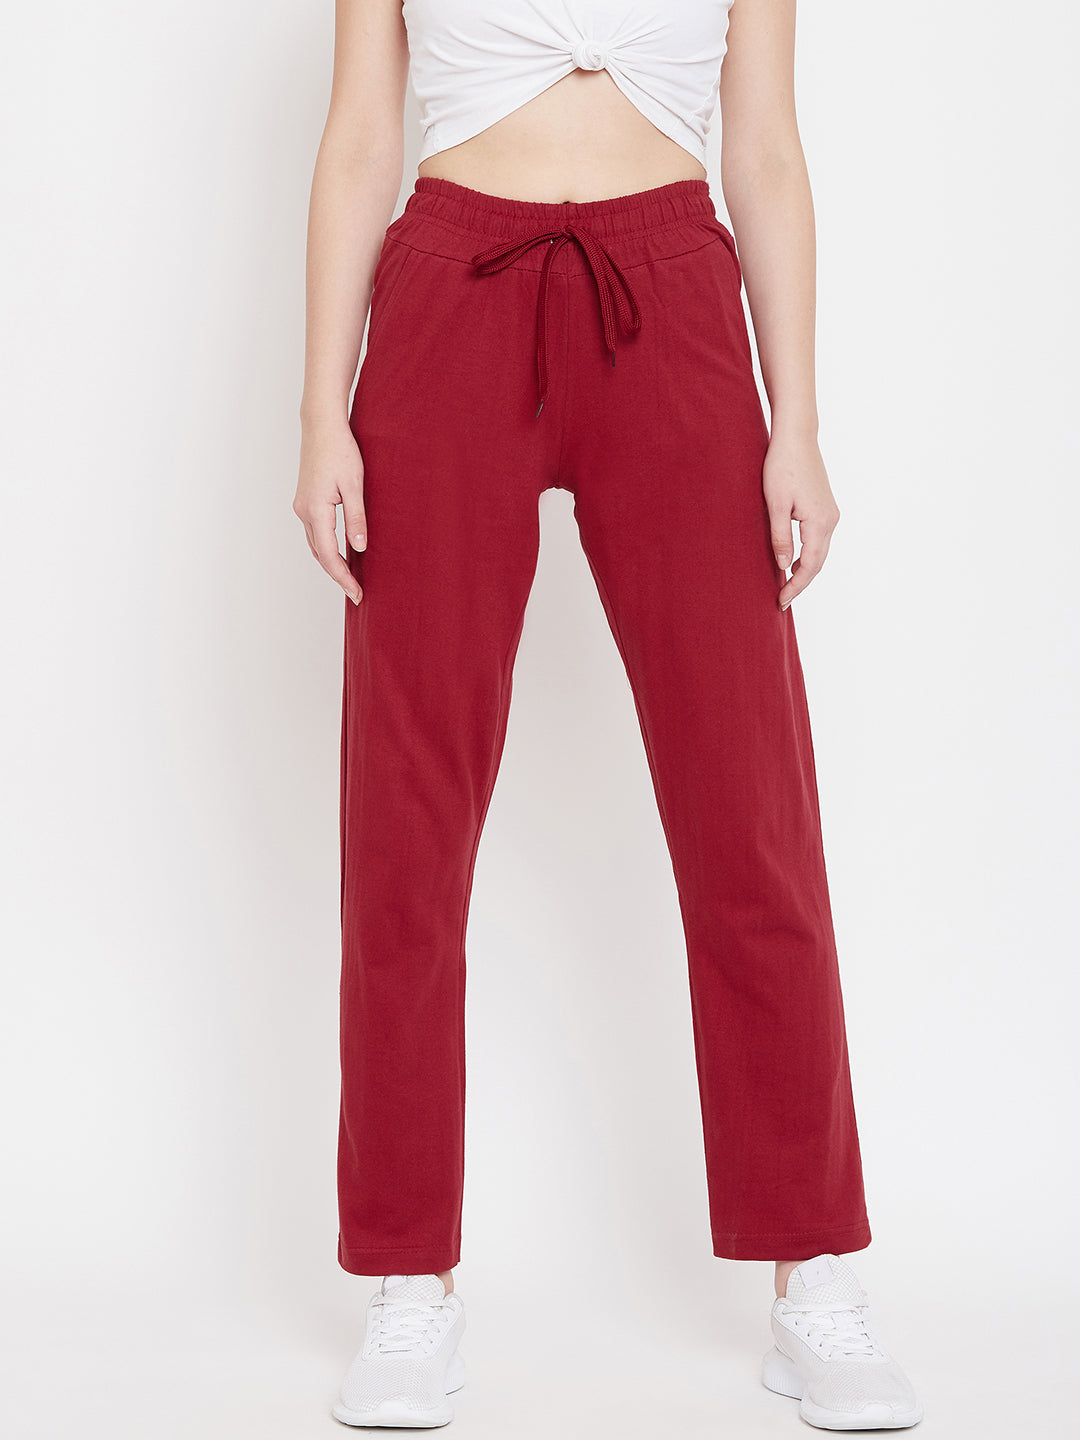 Women's Pack of 2 Track Pants-Light Grey and Maroon